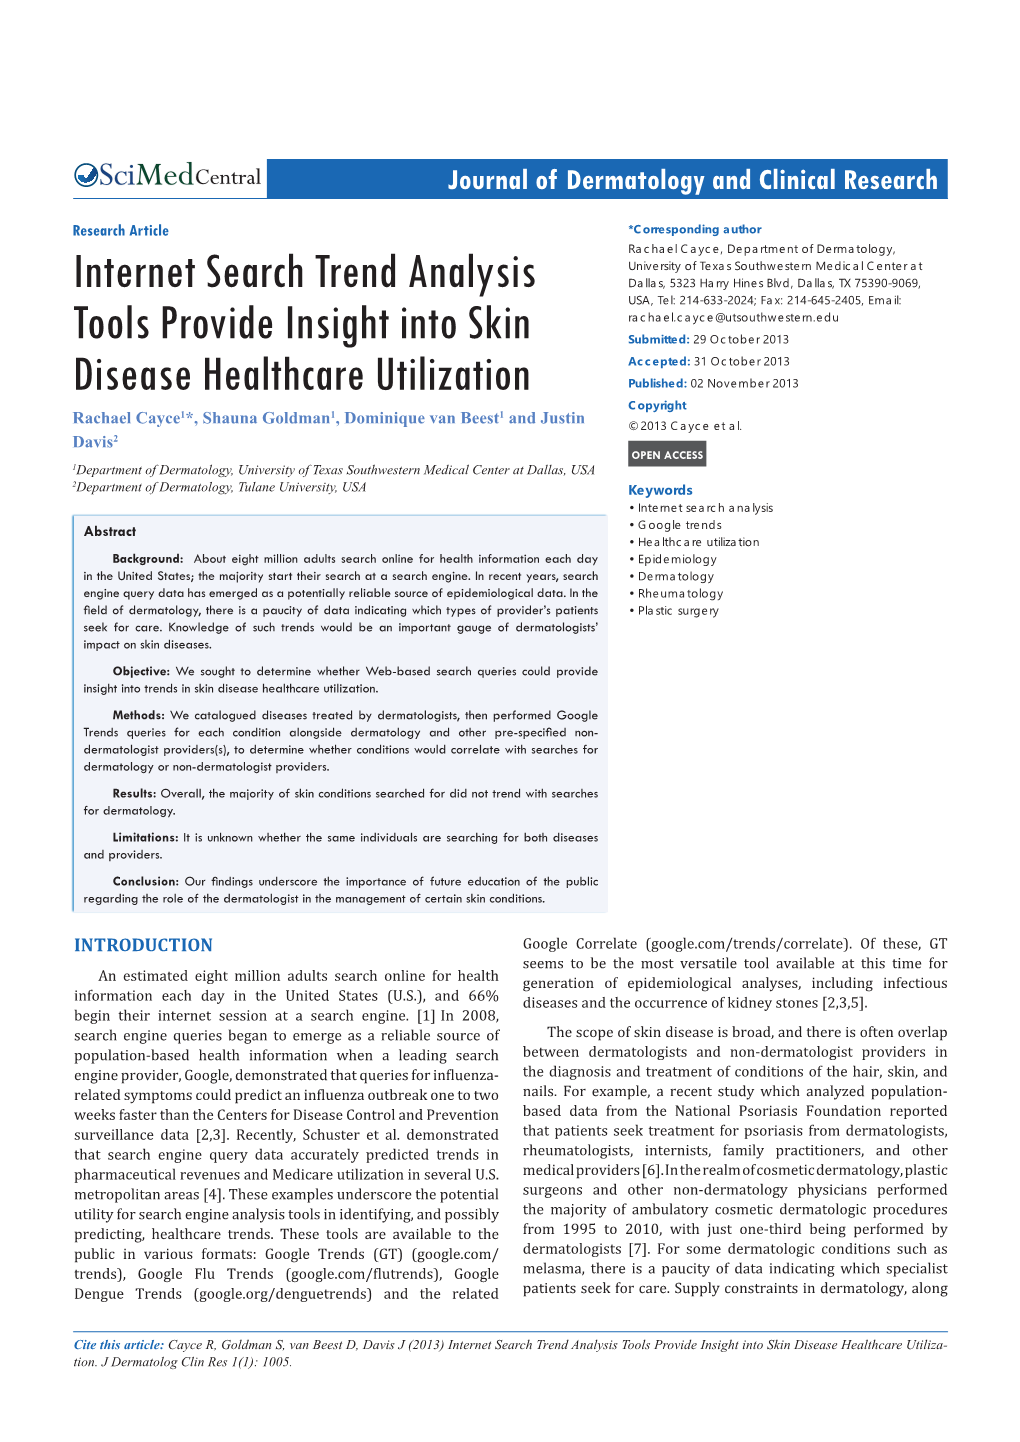 Internet Search Trend Analysis Tools Provide Insight Into Skin Disease Healthcare Utiliza- Tion